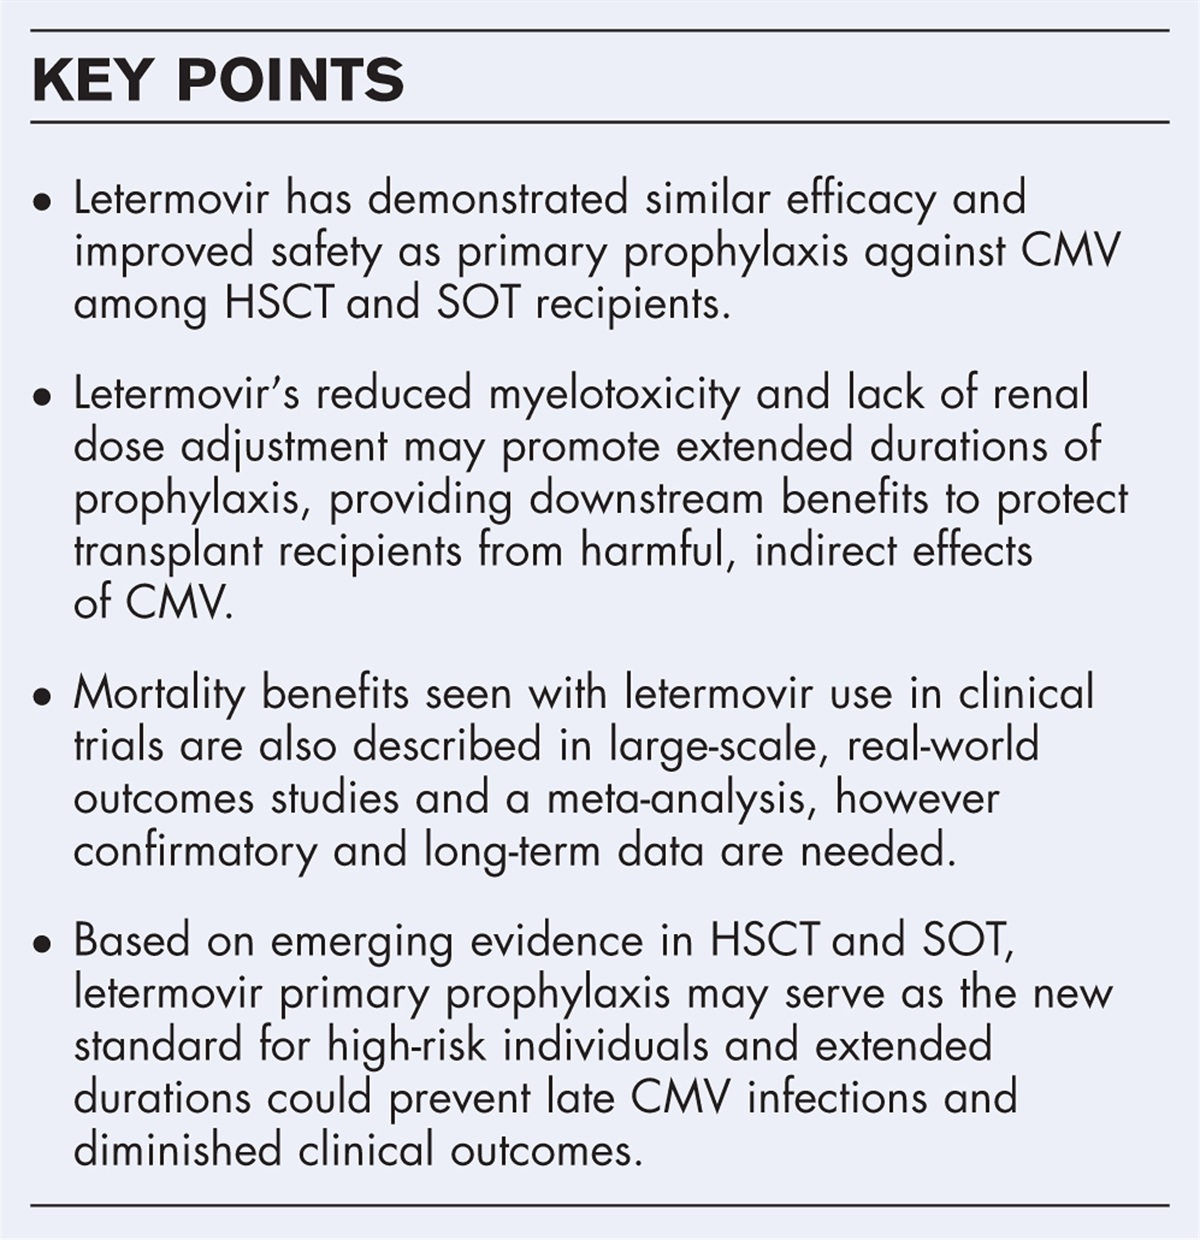 A new direction for cytomegalovirus prophylaxis among transplant recipients: Benefits and nonviral outcomes of letermovir use as primary CMV prophylaxis